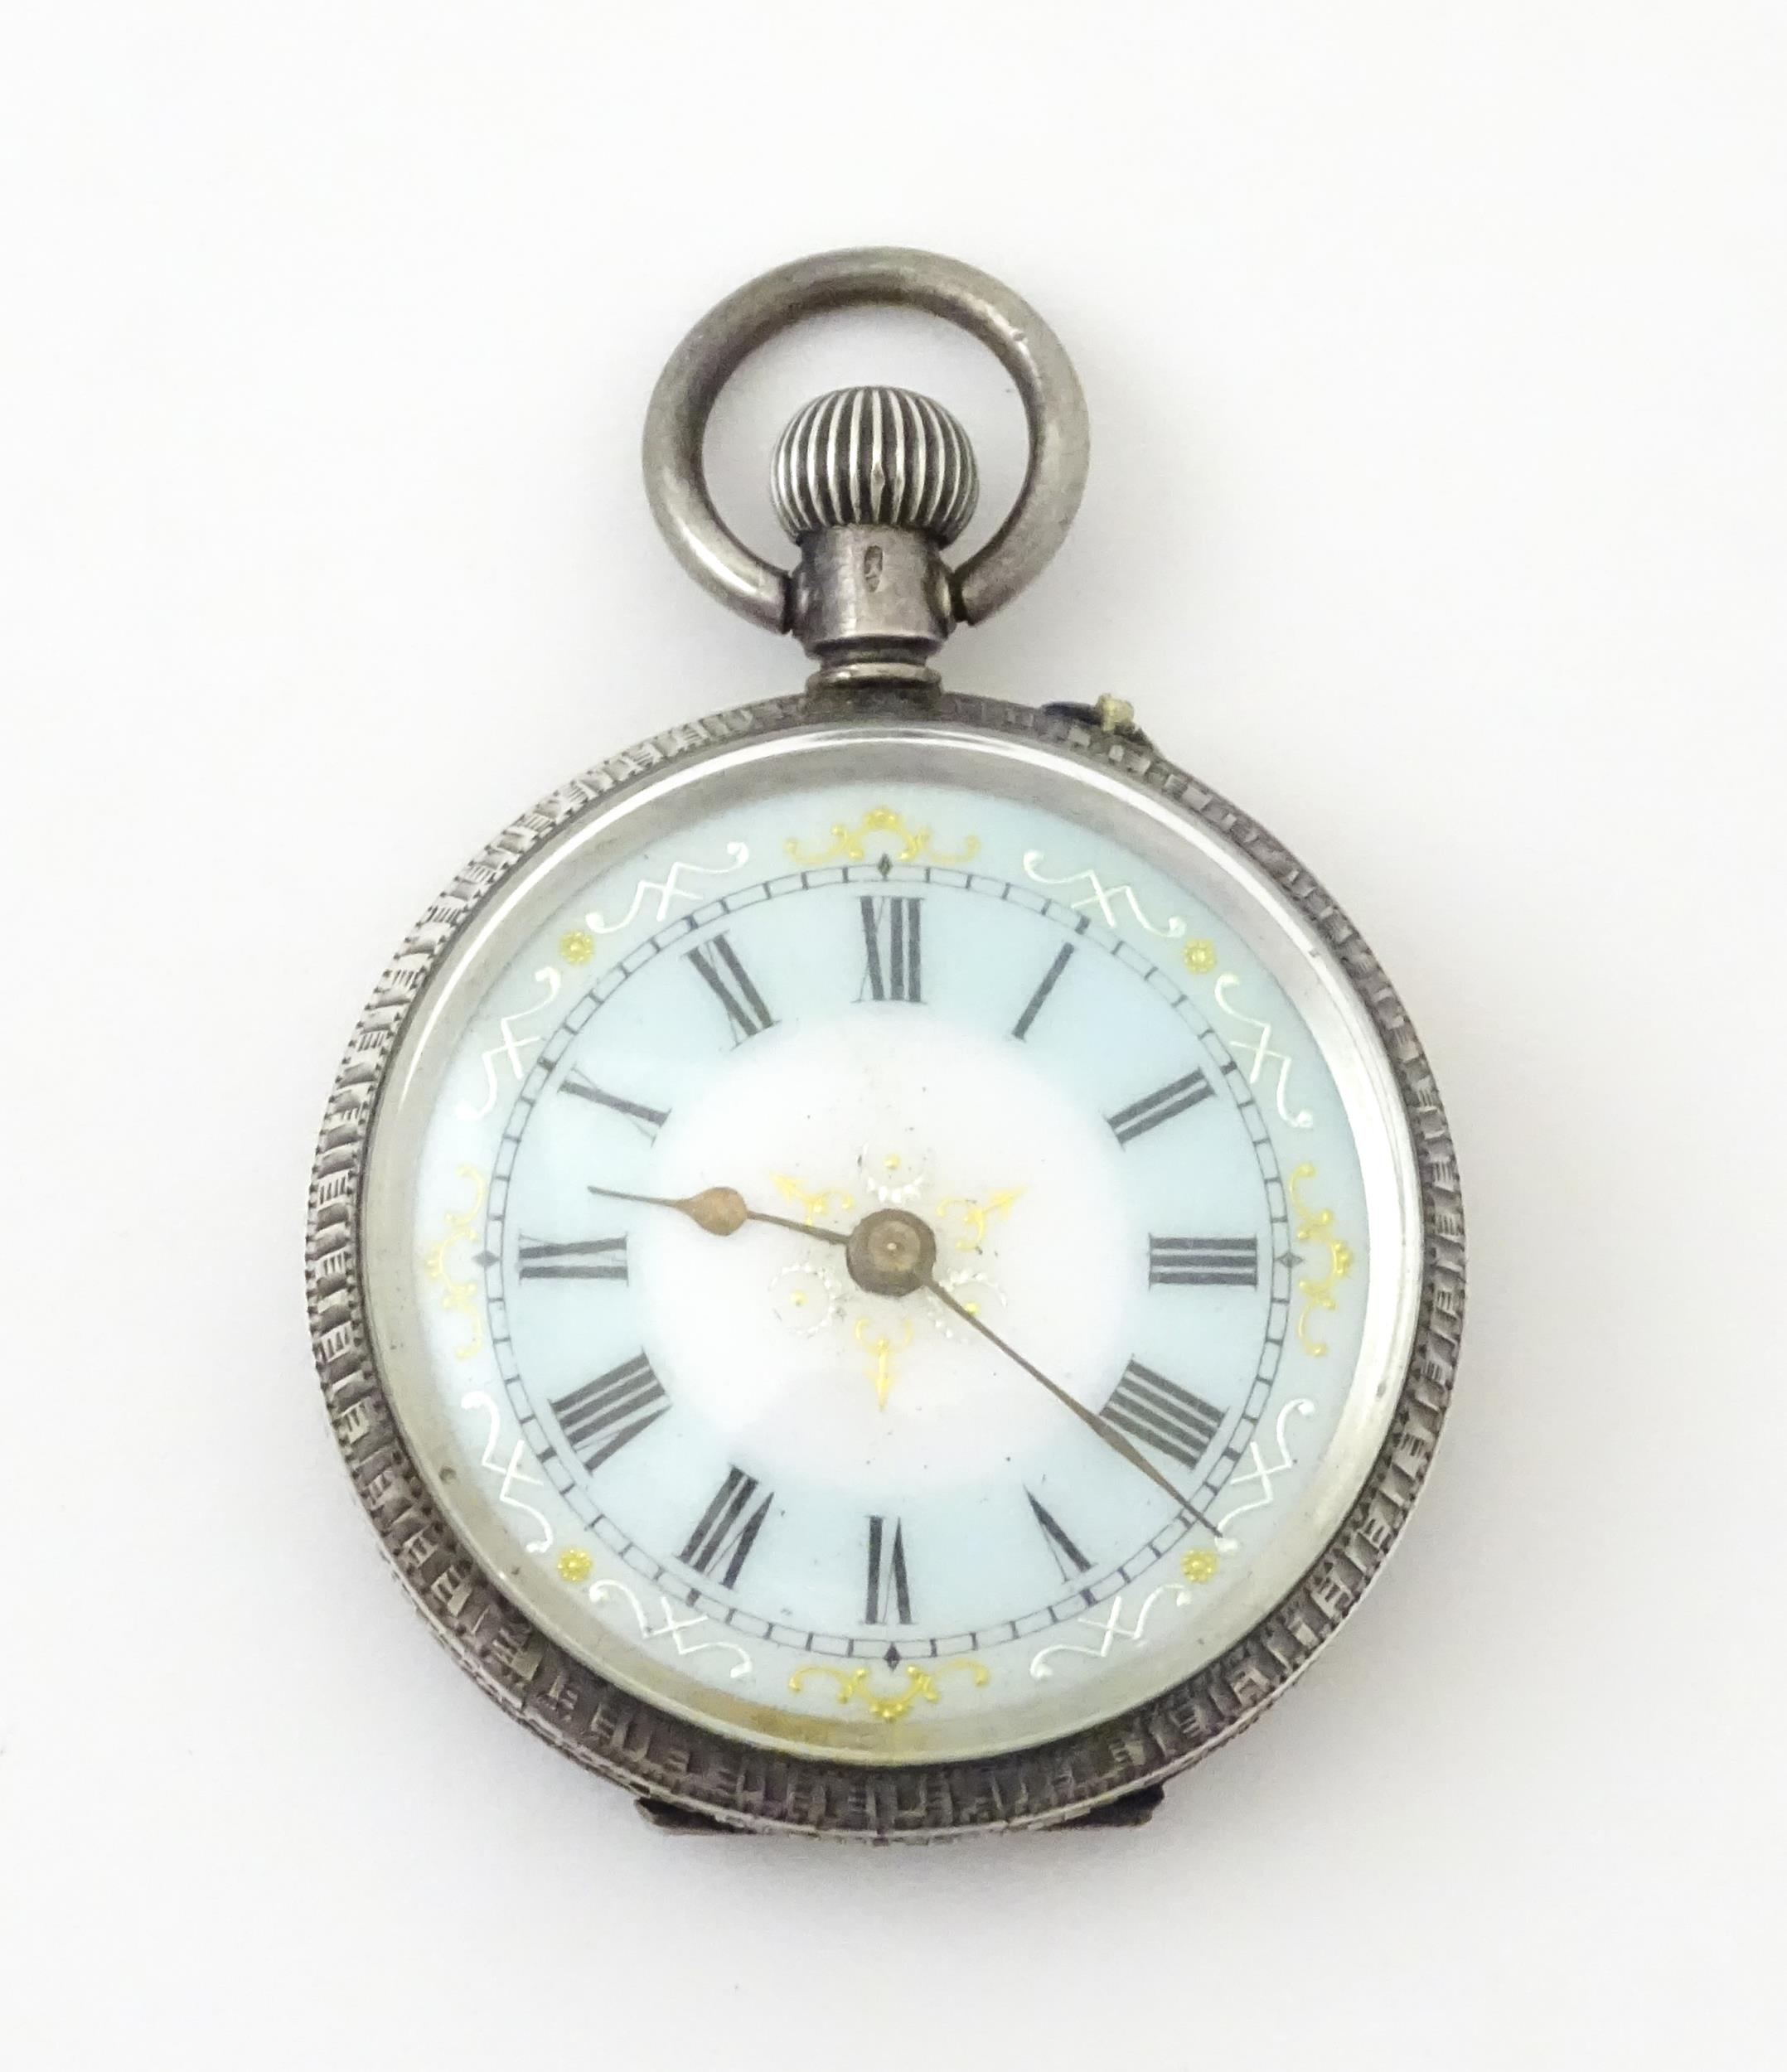 A Swiss silver cased pocket / fob watch with enamel detail and Roman Numerals. Approx 1 /4" wide